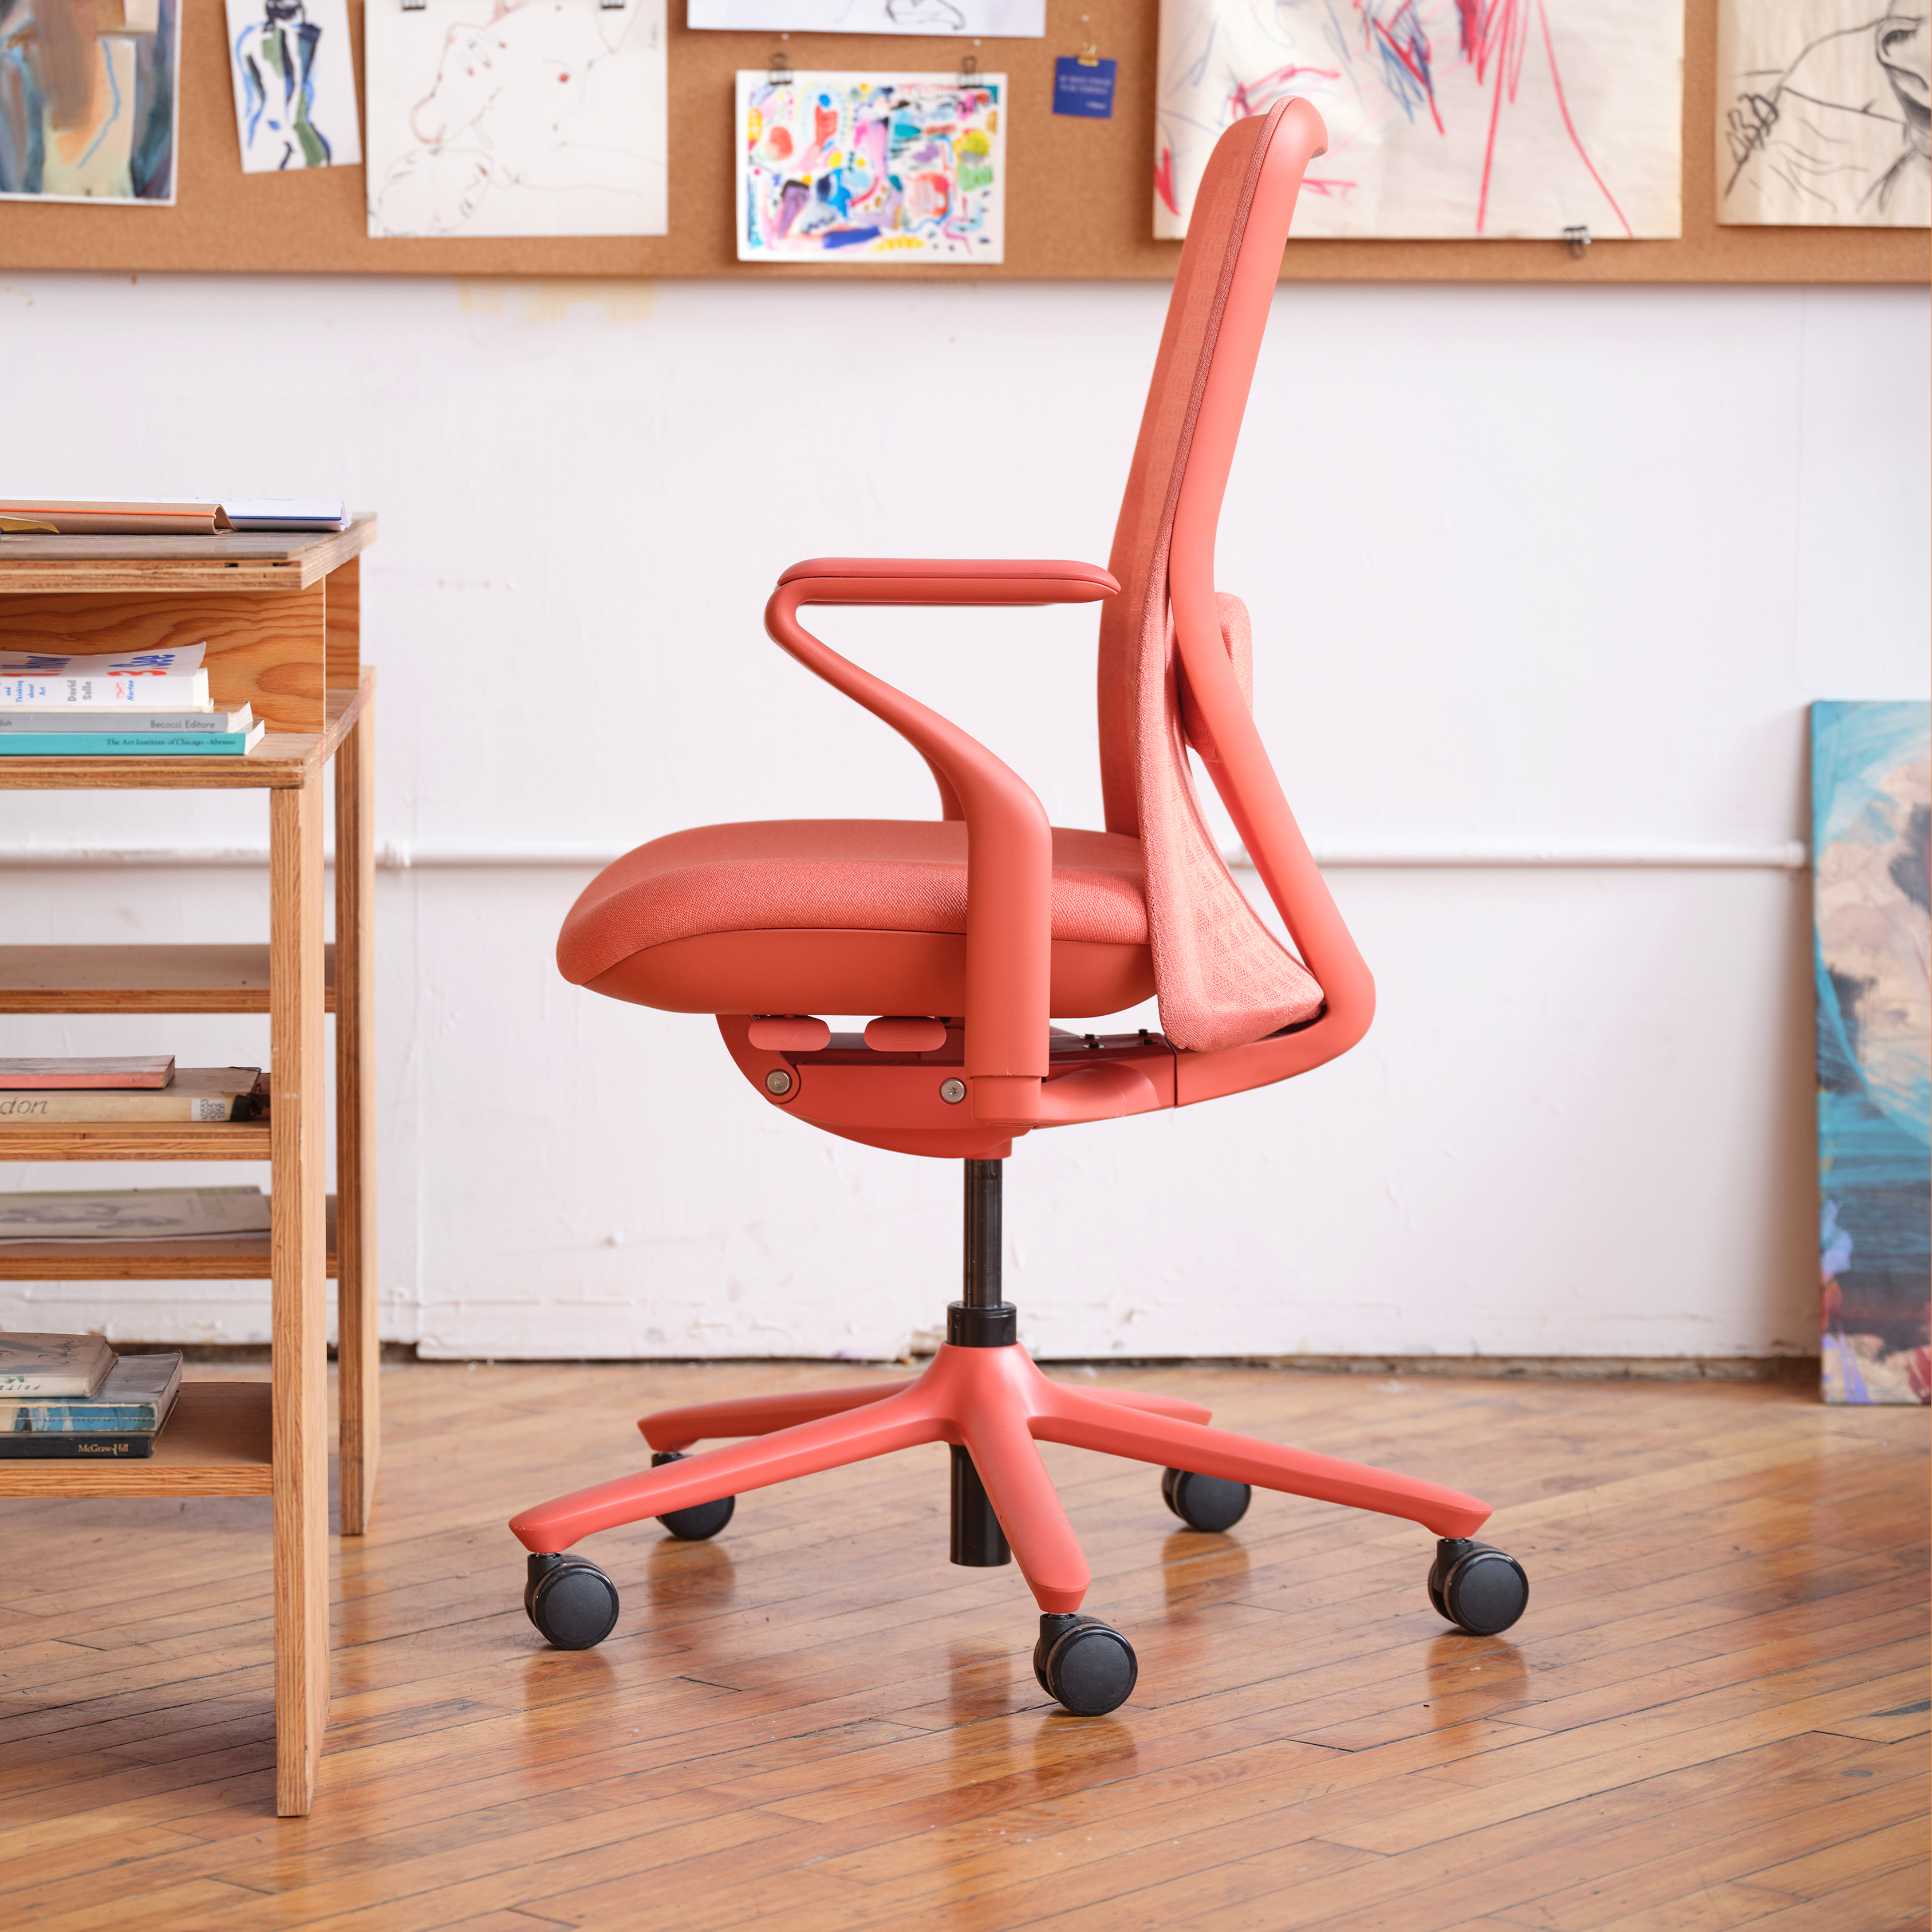 Coral-colored office chair turned to the side. 